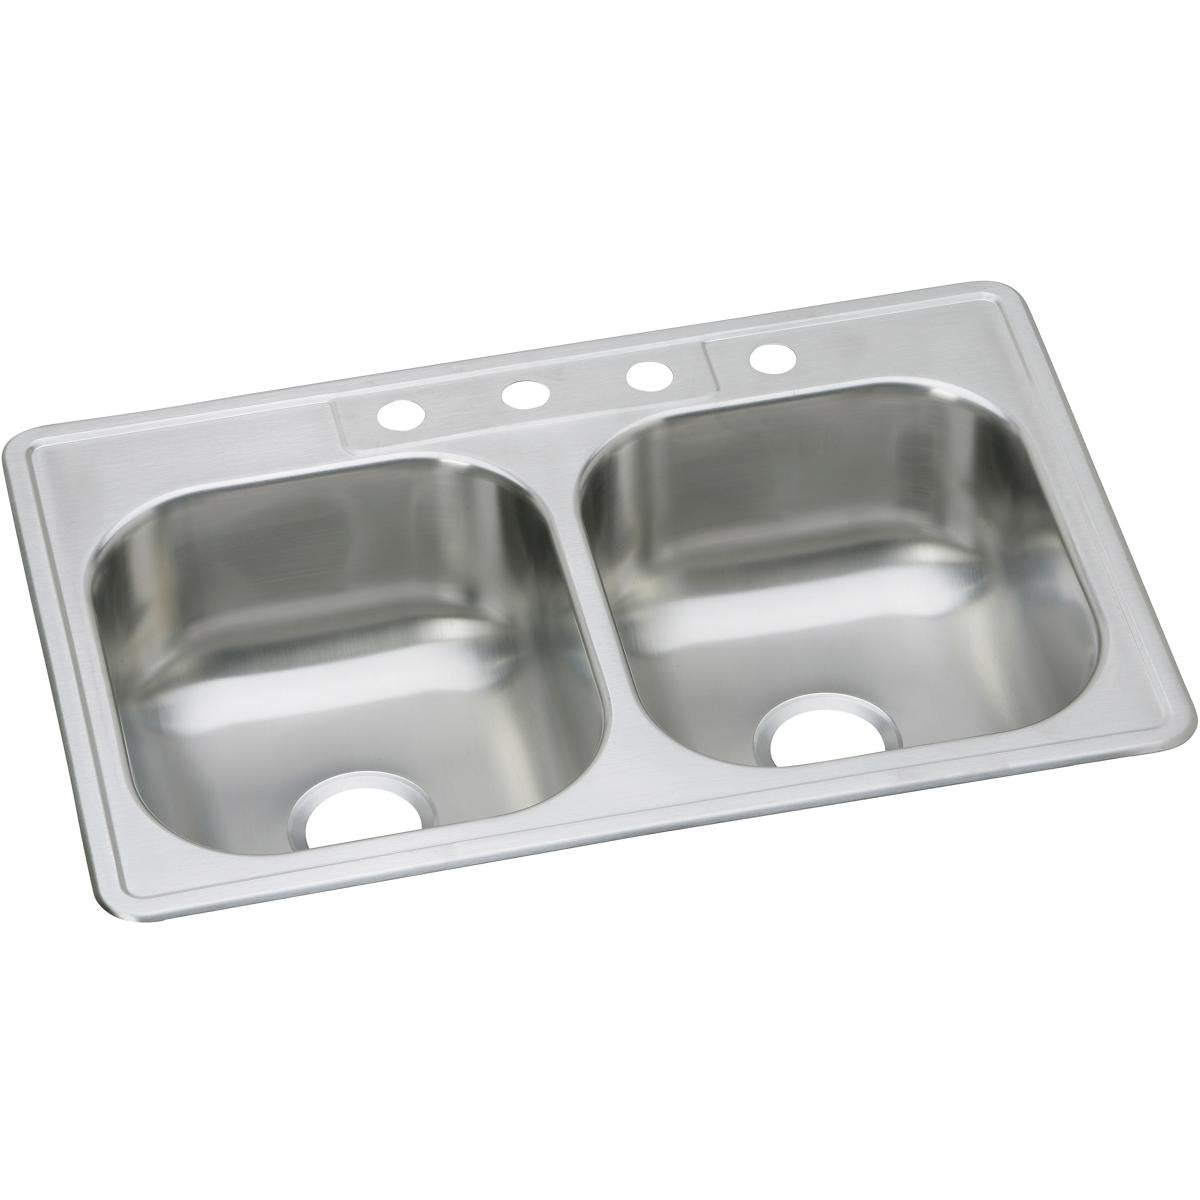 Elkay DSE233223 Dayton Stainless Steel 33" x 22" x 8-1/16", 3-Hole Equal Double Bowl Drop-in Sink